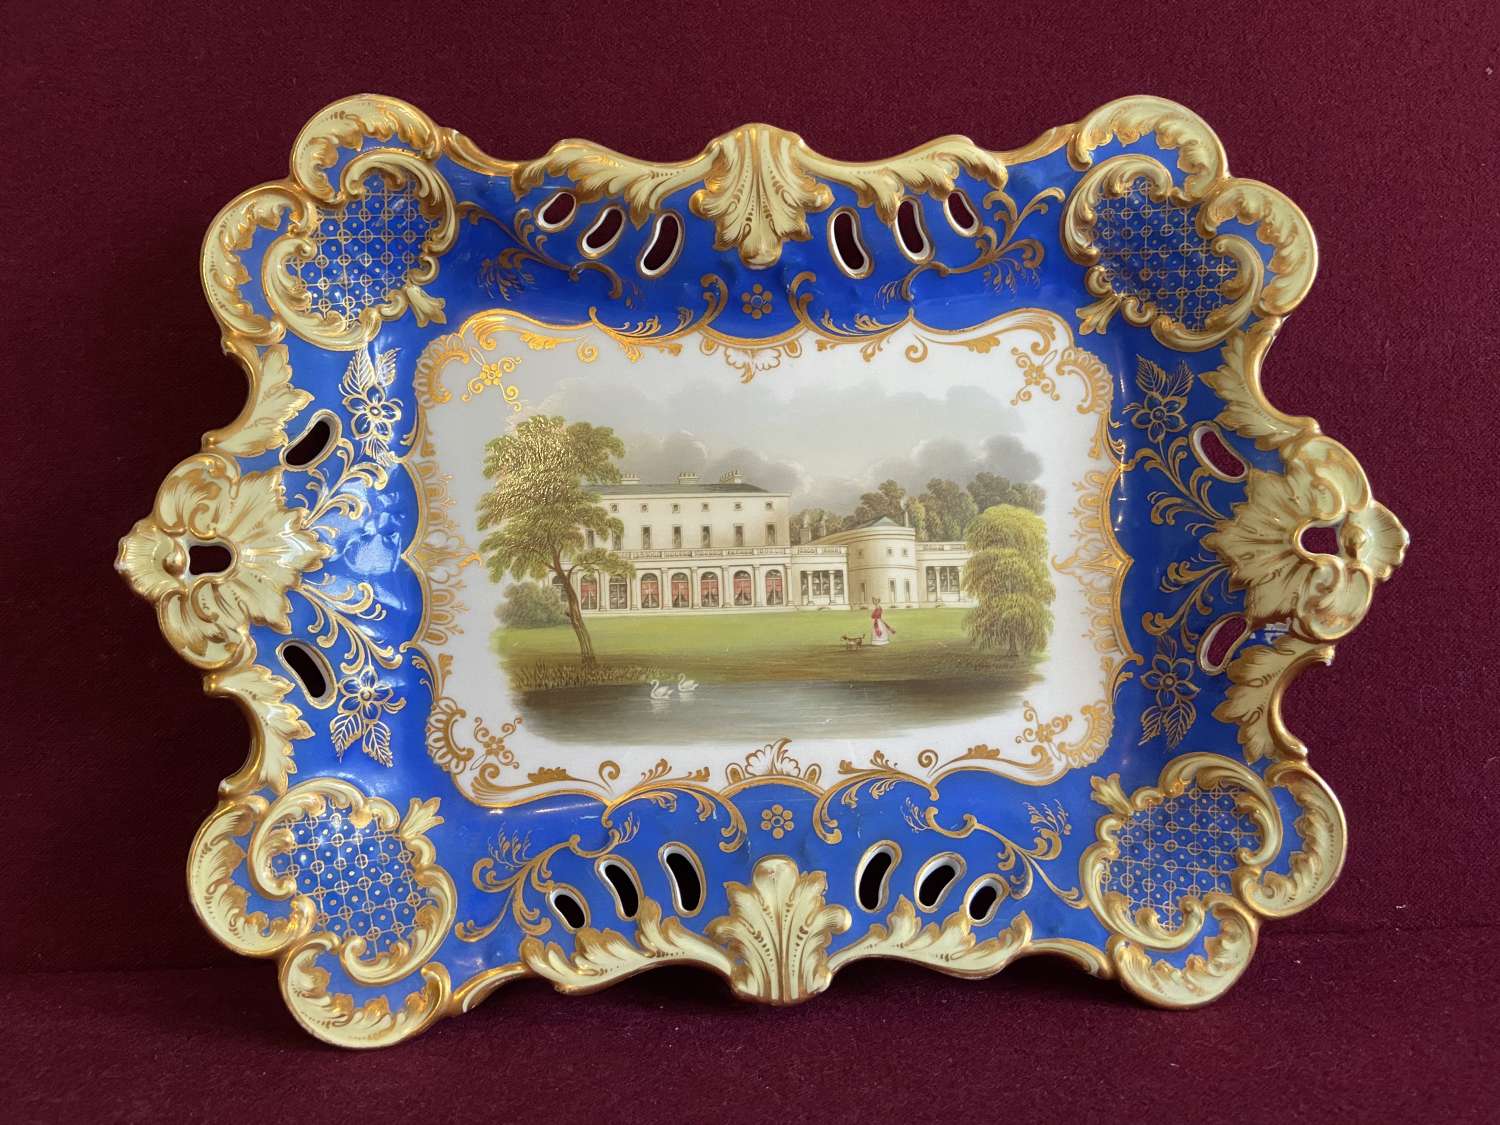 An English Porcelain Tray c.1830 with a view of Frogmore House